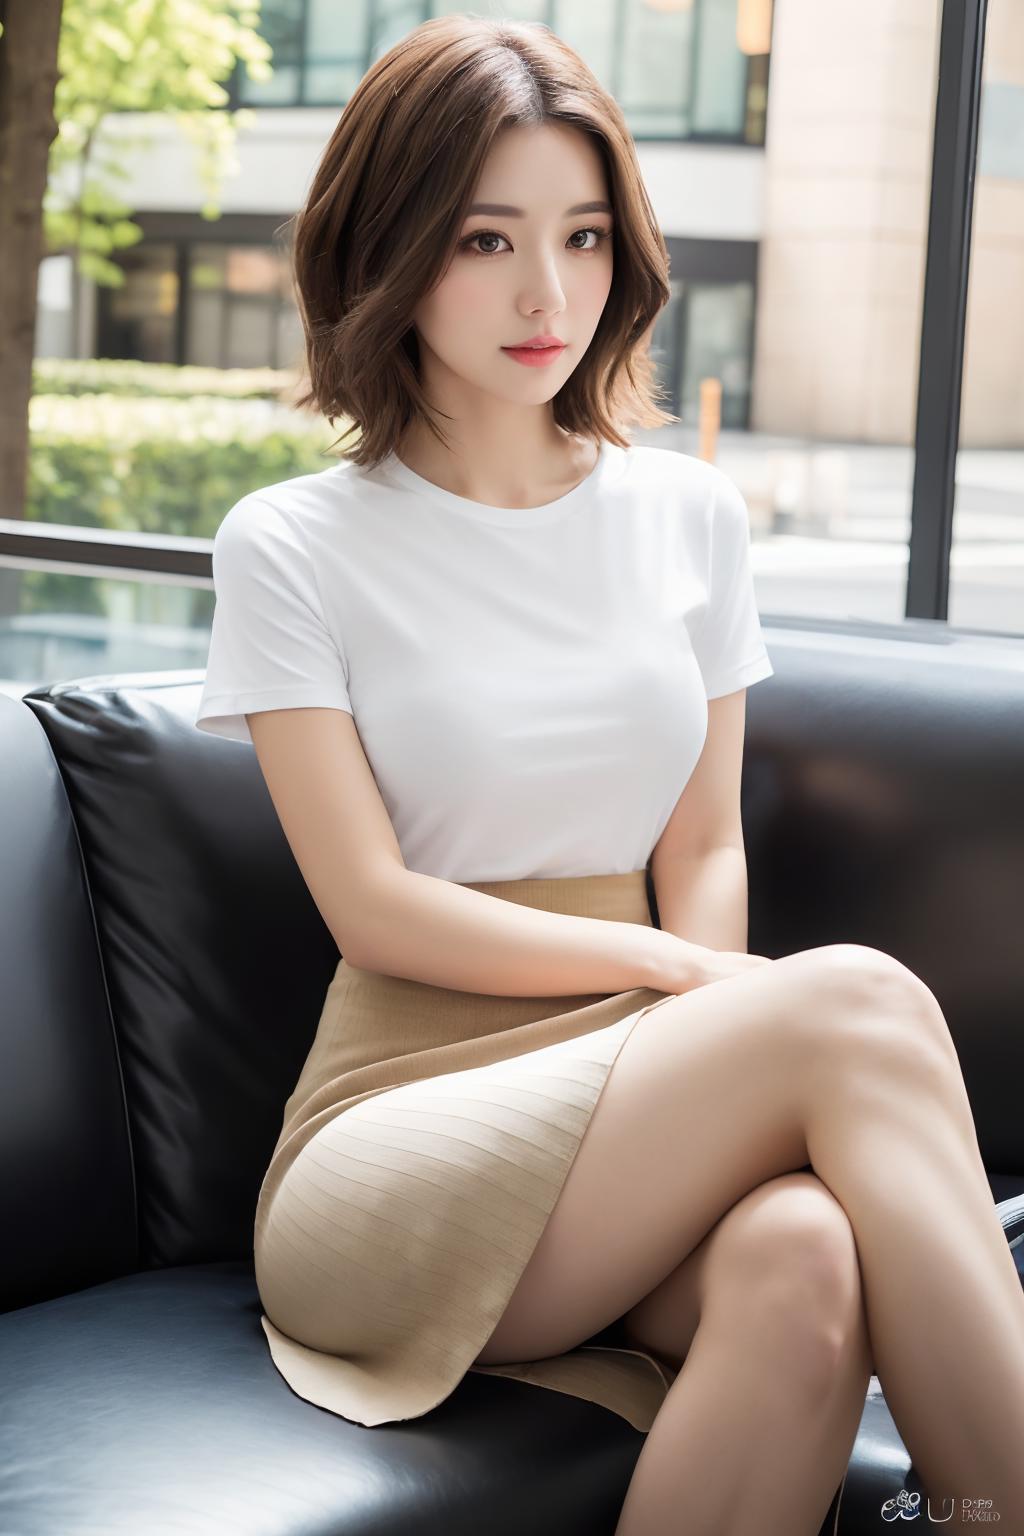 A beautiful woman wearing a white shirt and skirt poses for a picture.